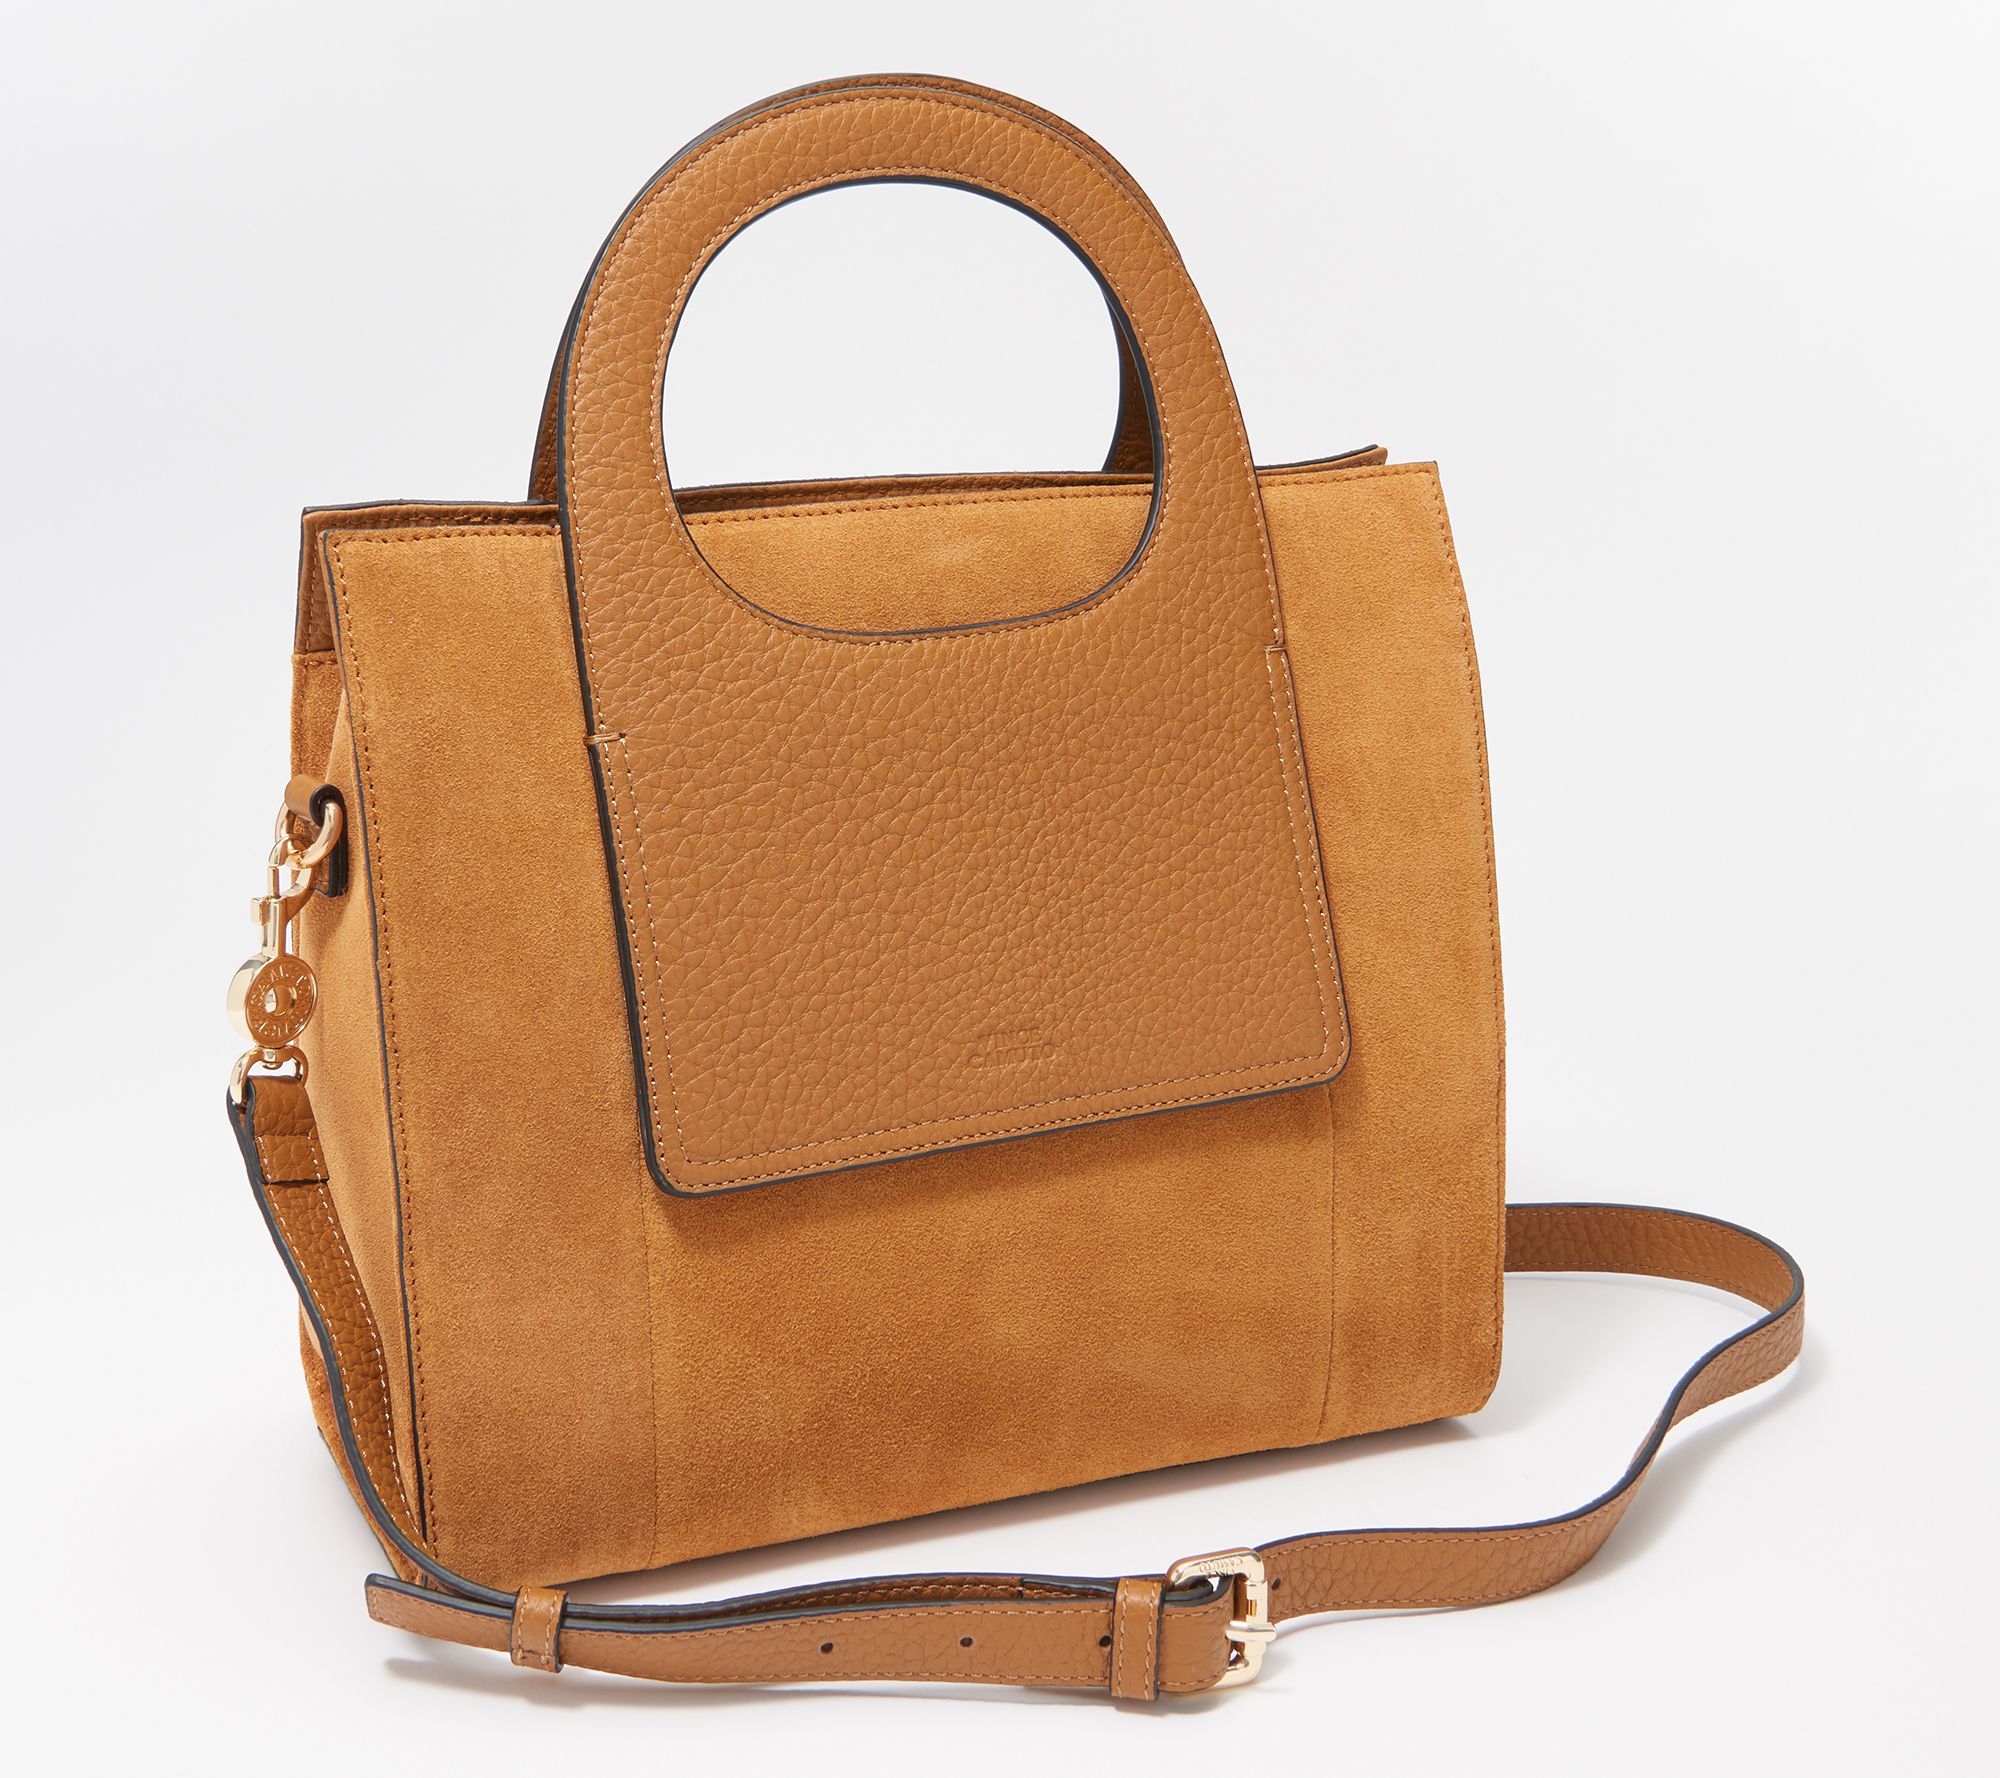 Vince Camuto Small Leather Tote with Crossbody Strap - Beck - QVC.com